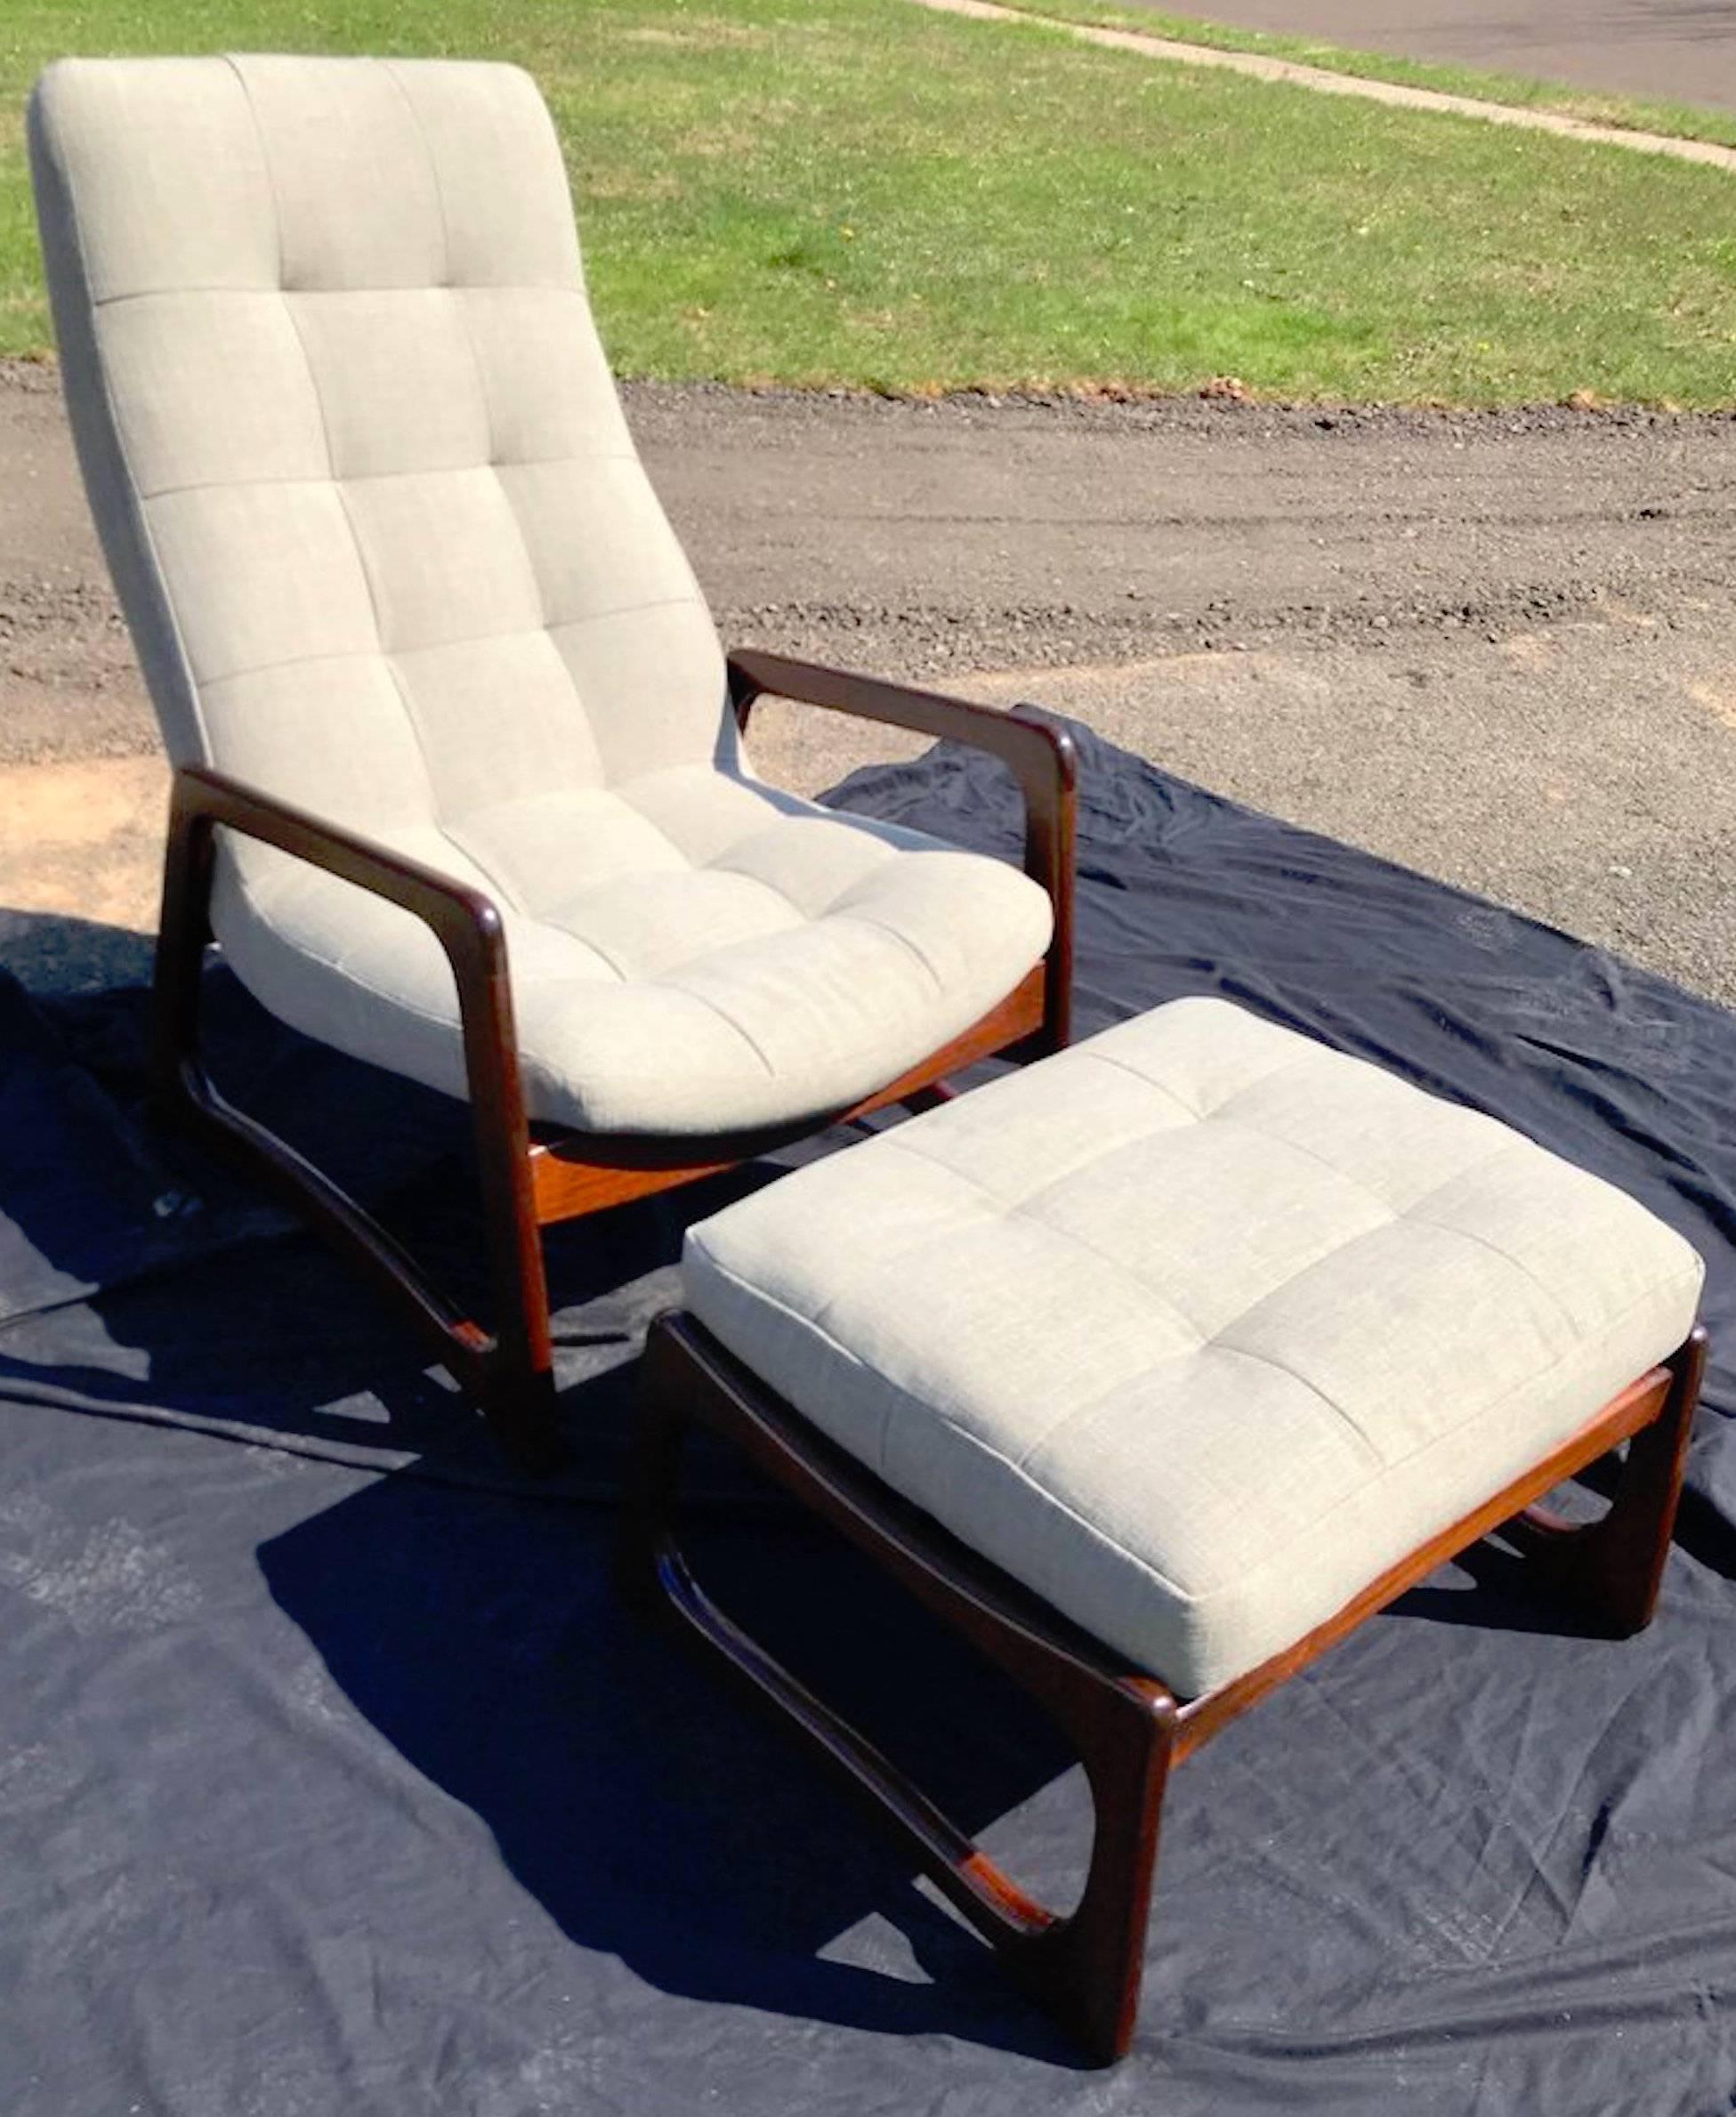 Carved Adrian Pearsall Lounge Chair and Ottoman for Craft Associates, Restored